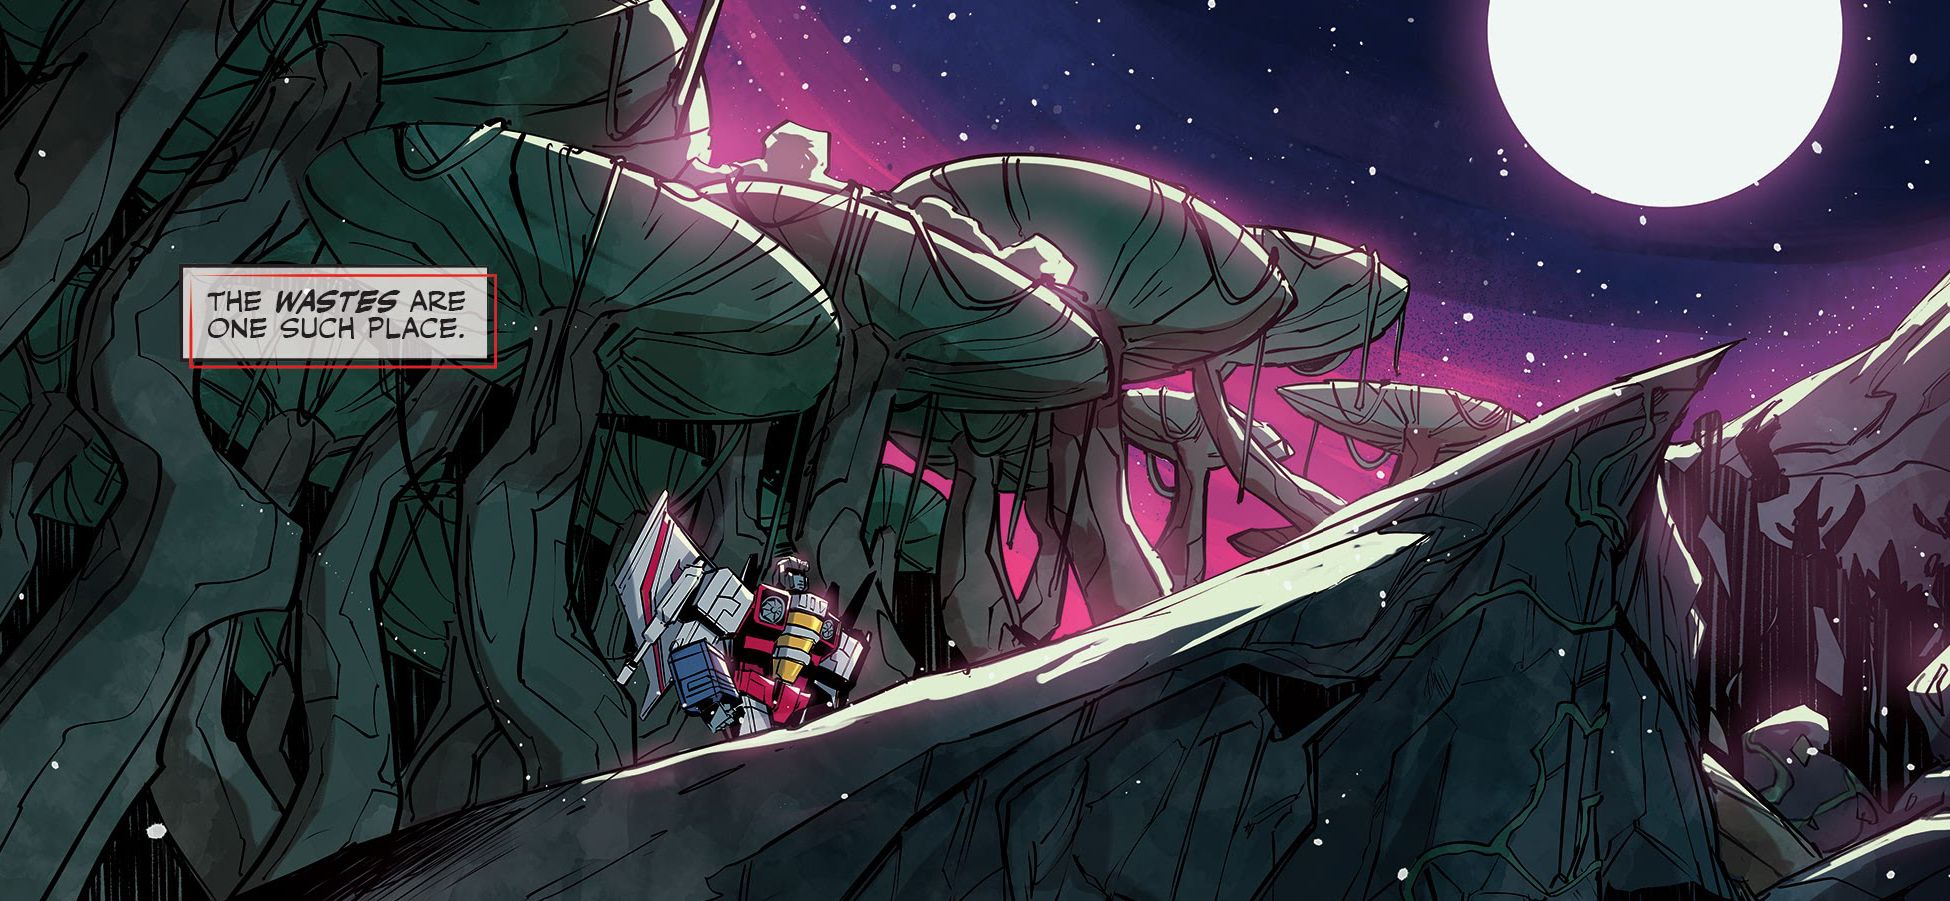 Starscream looks at the moon in the wastes of cybertron